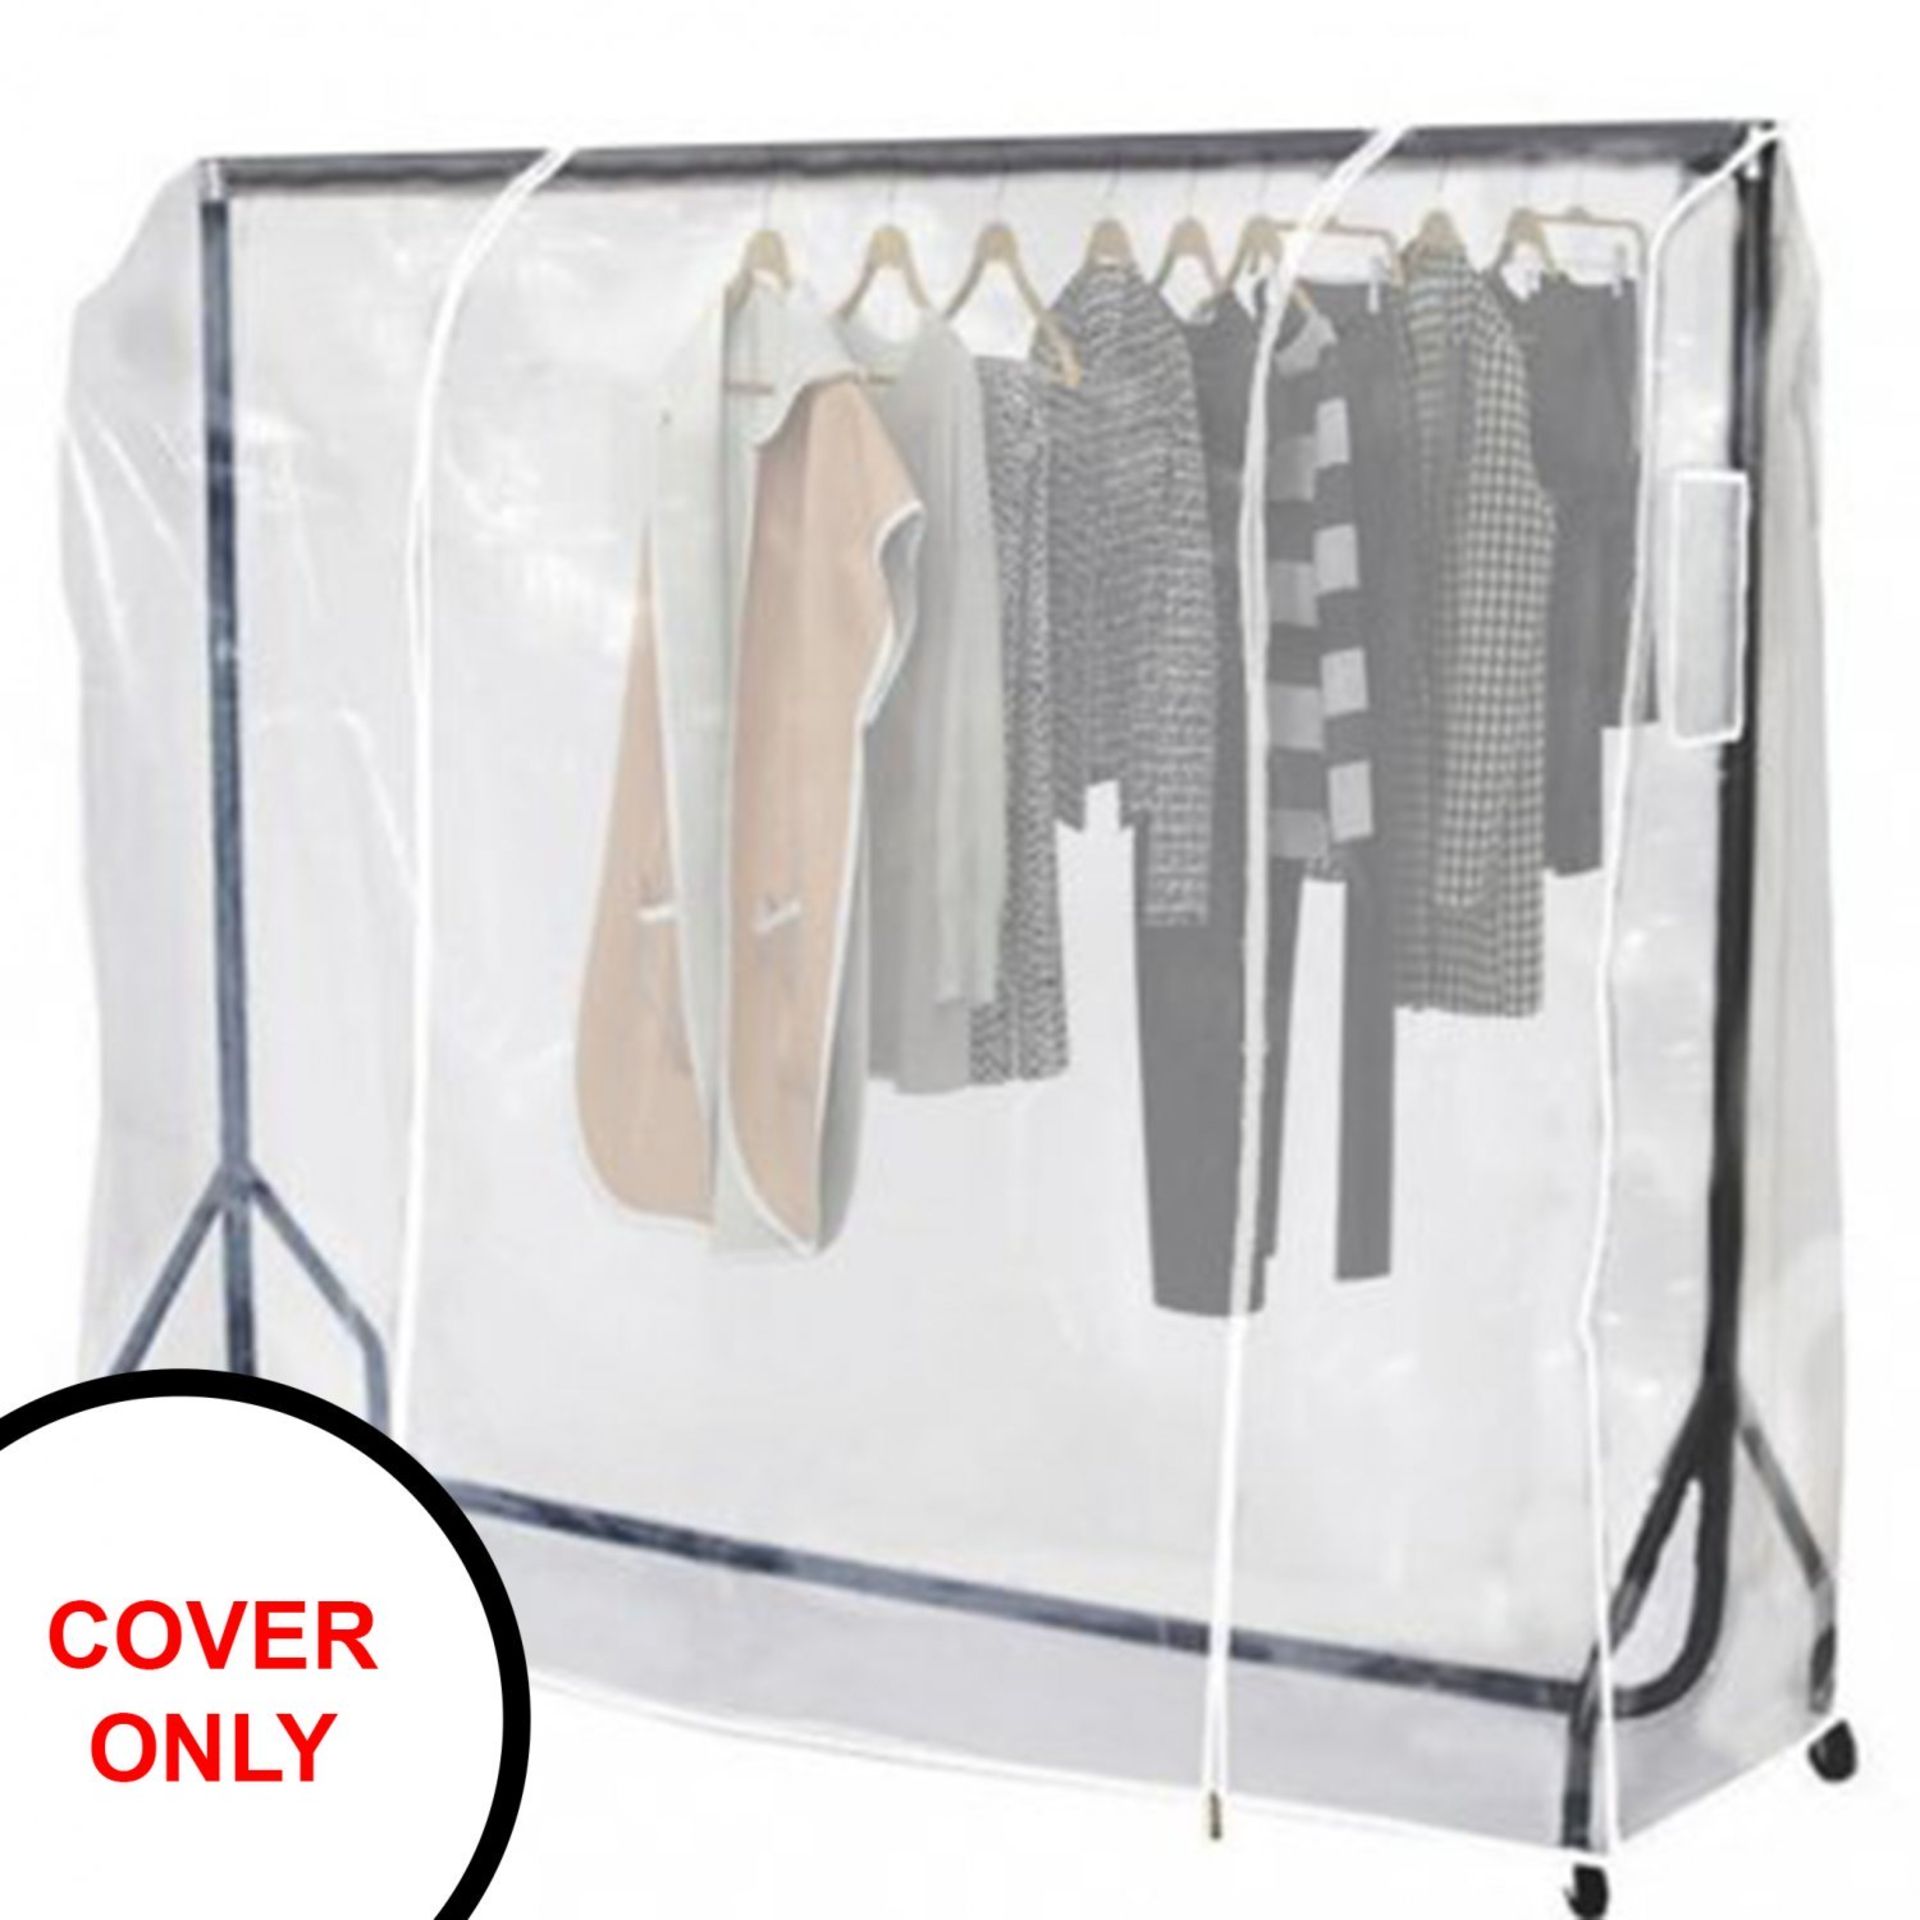 (D43) Heavy Duty 6ft Clothes Rail Cover The Perfect Way To Protect Your Clothes And Your Clot...